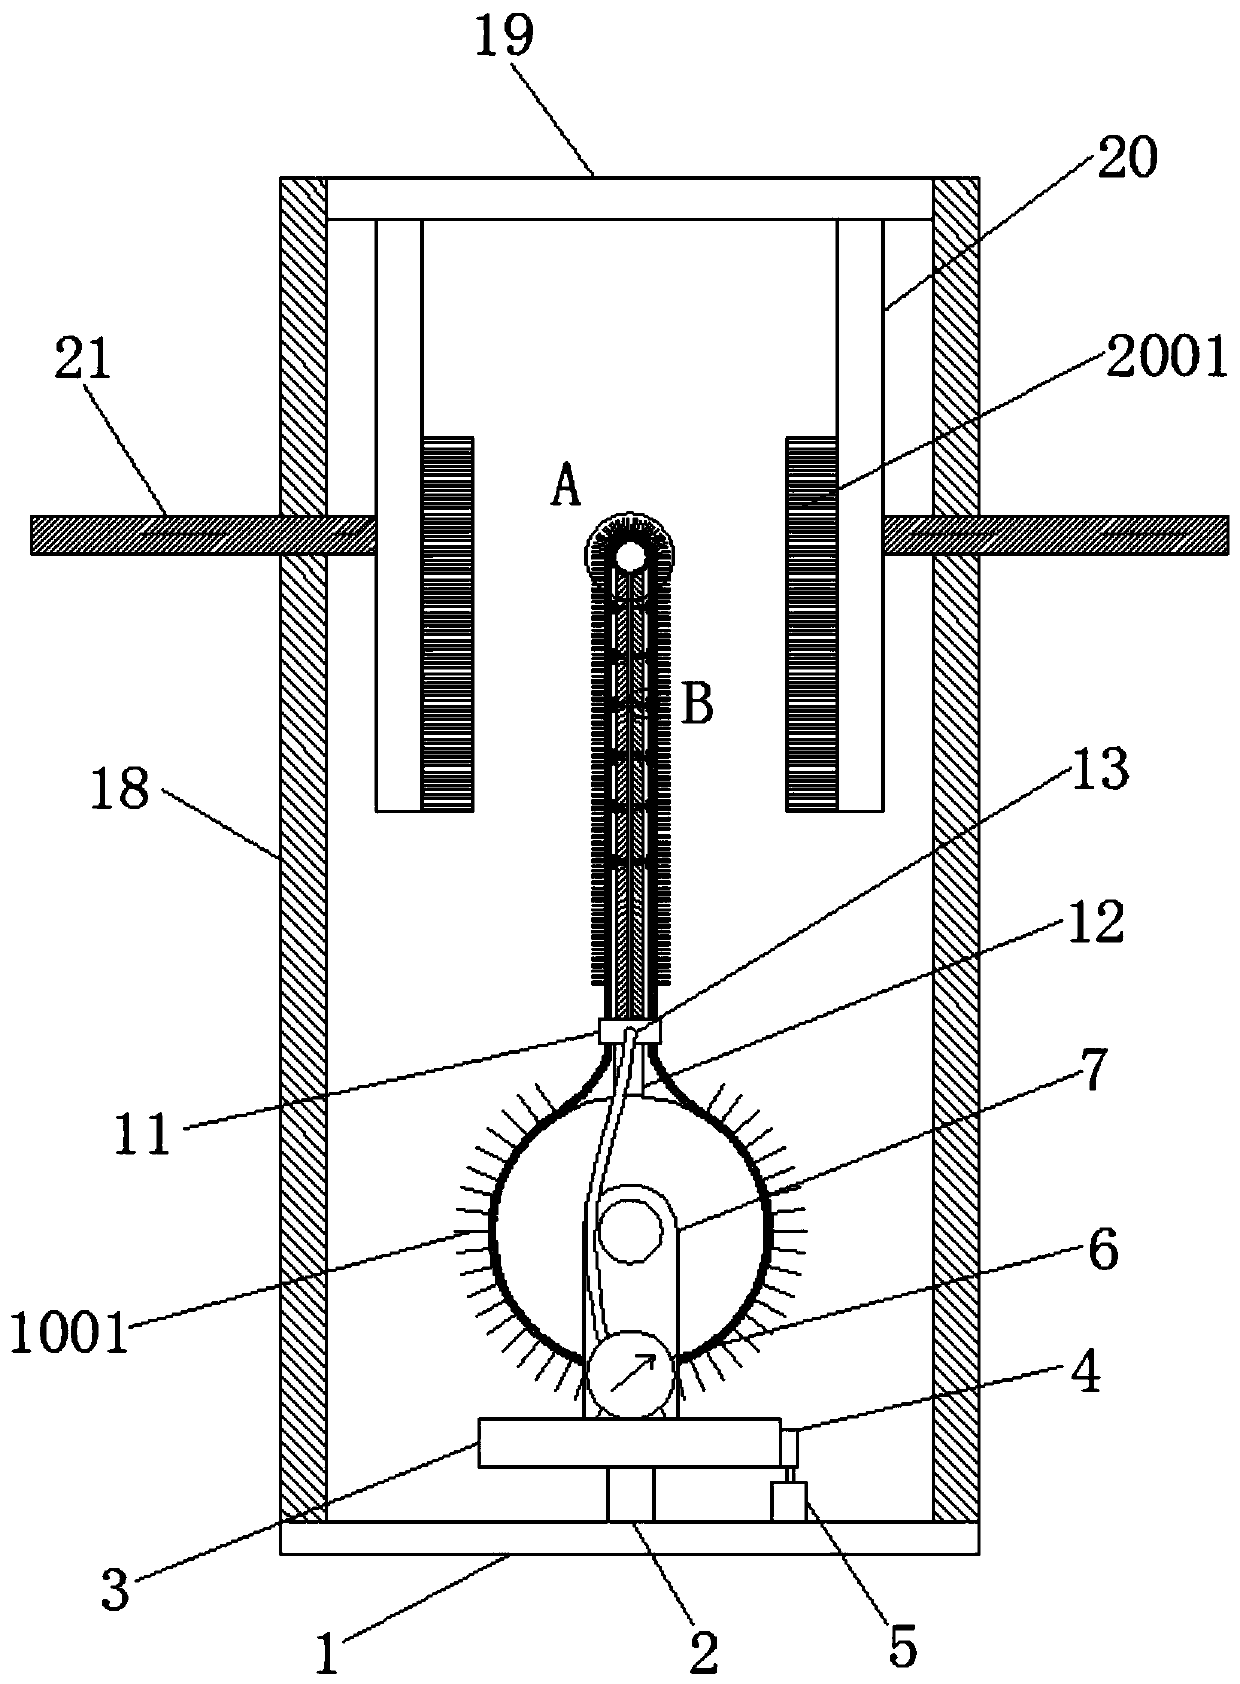 Medical test tube cleaning device capable of being adjusted and achieving all-sided cleaning